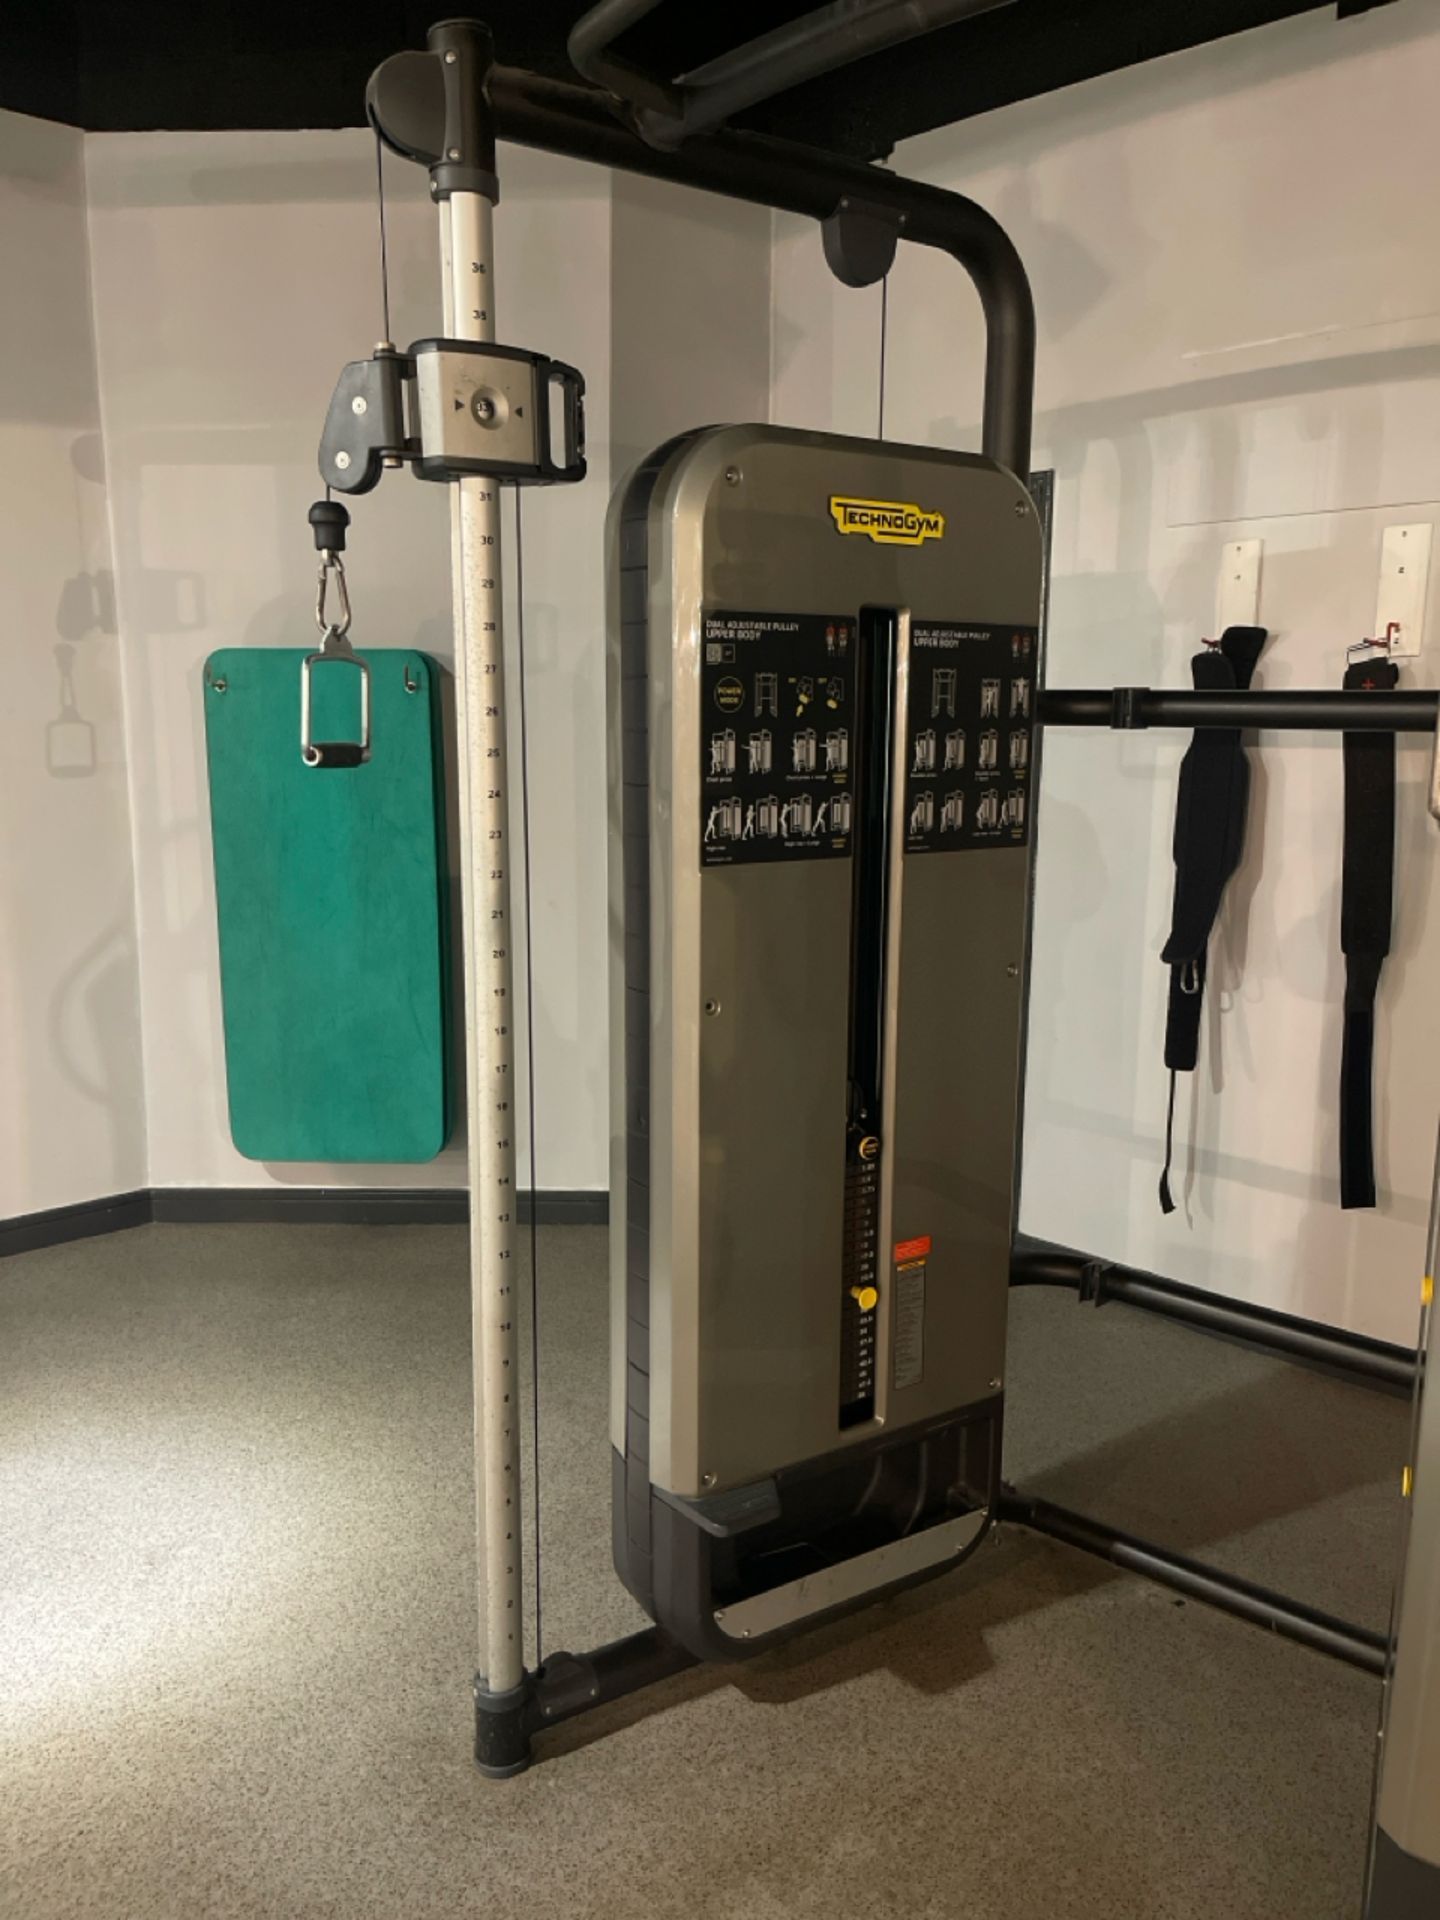 Technogym Dual Action Pulley - Image 2 of 9